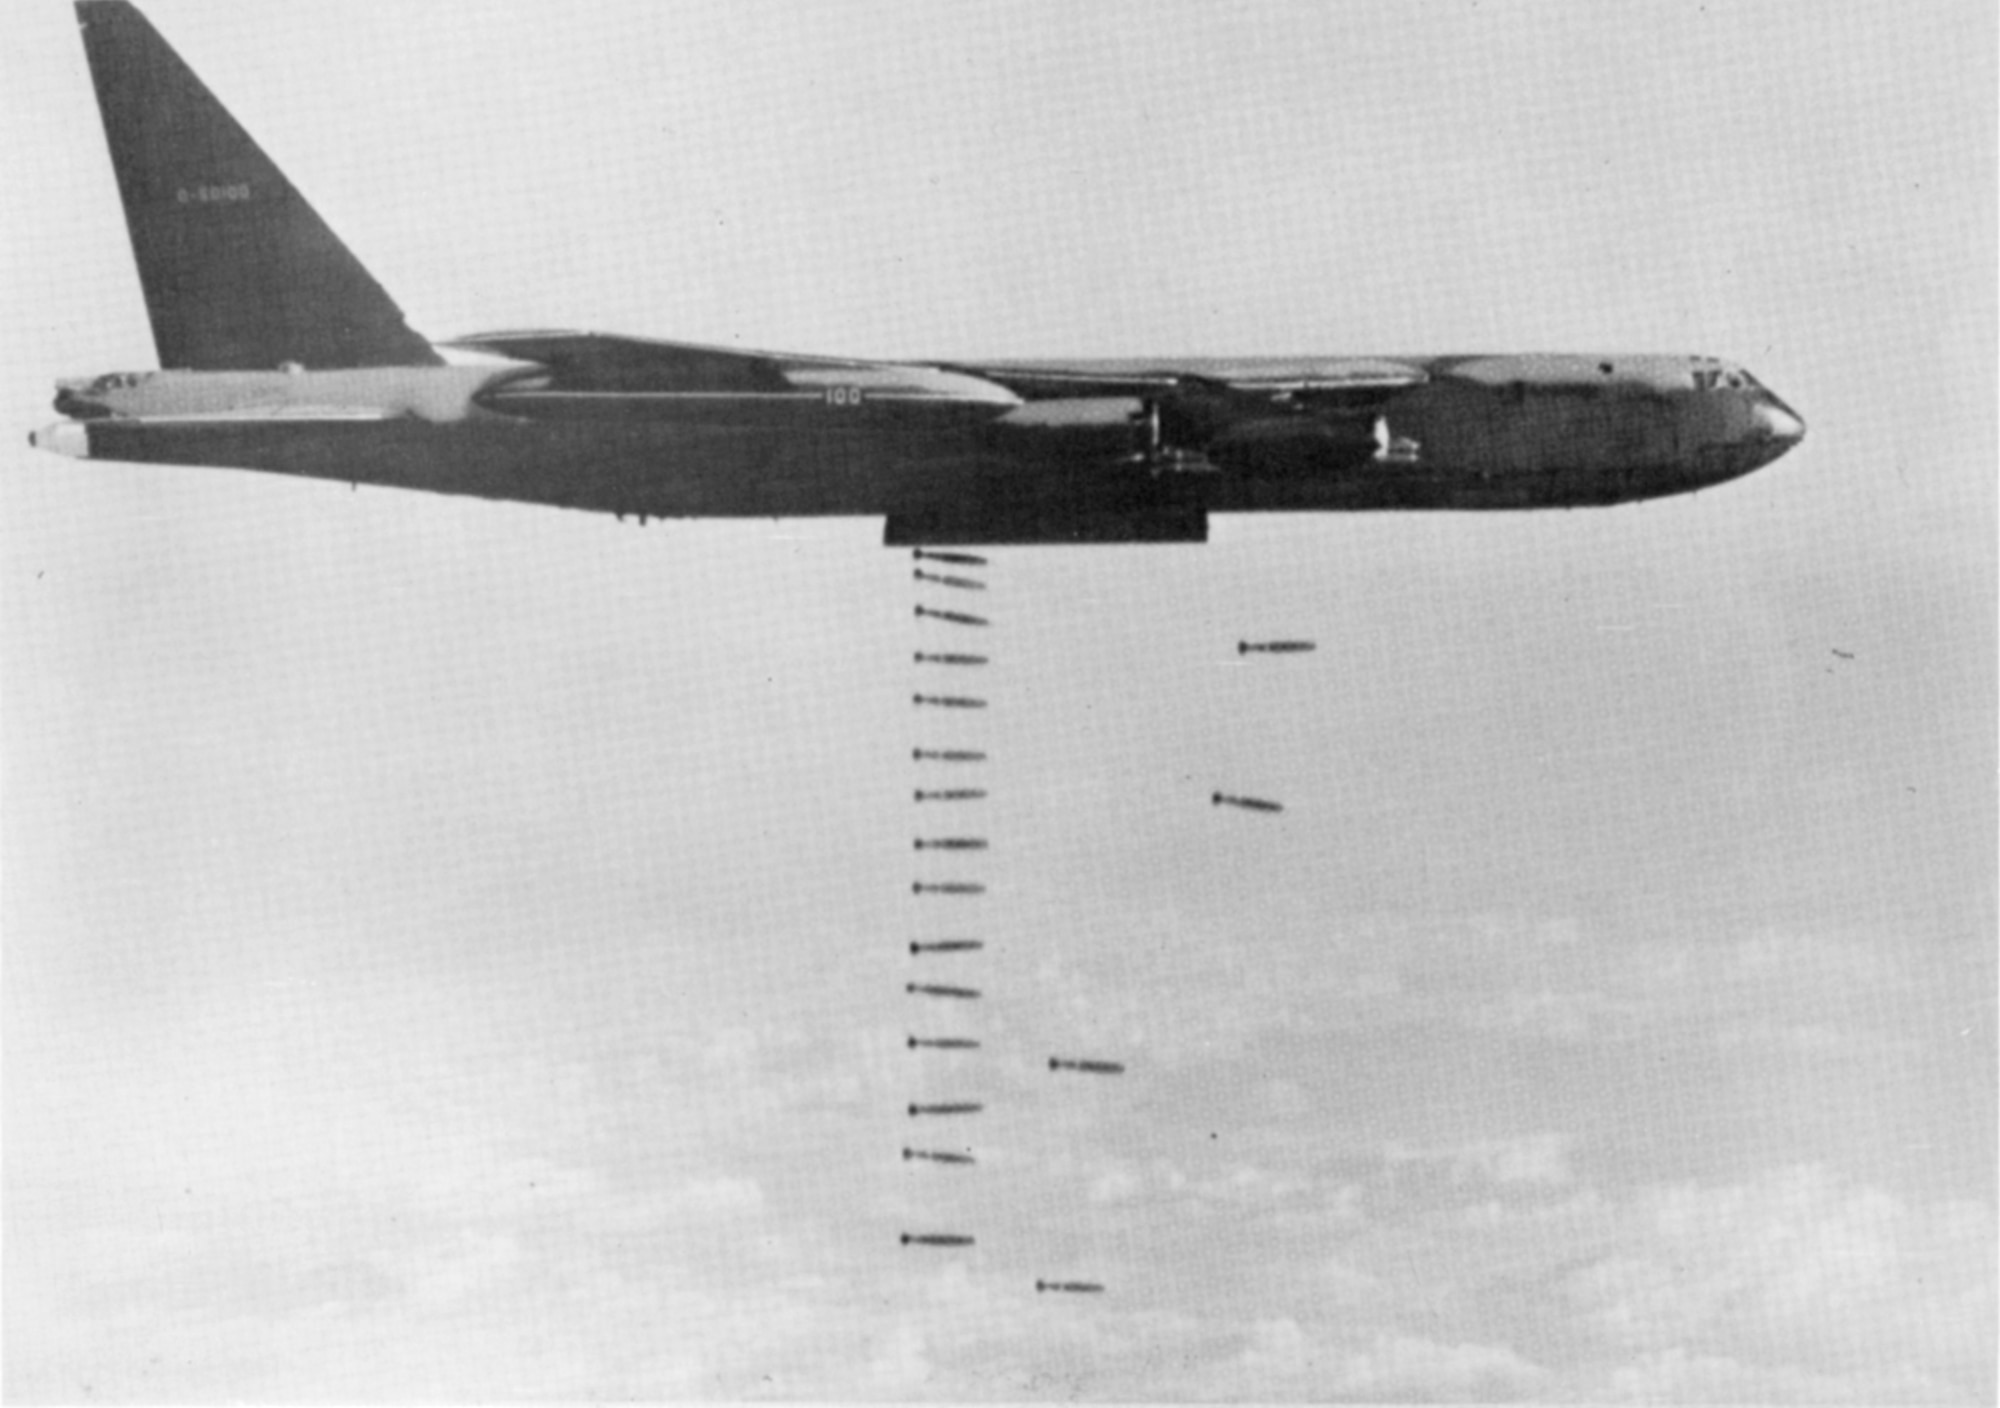 A B-52D Stratofortress from the 93rd Bombardment Wing at Castle Air Force Base, Calif., drops bombs. B-52Ds were modified in 1966 to carry 108, 500-lb bombs while the normal conventional payload before was only 51. (Historical U.S. Air Force photo)